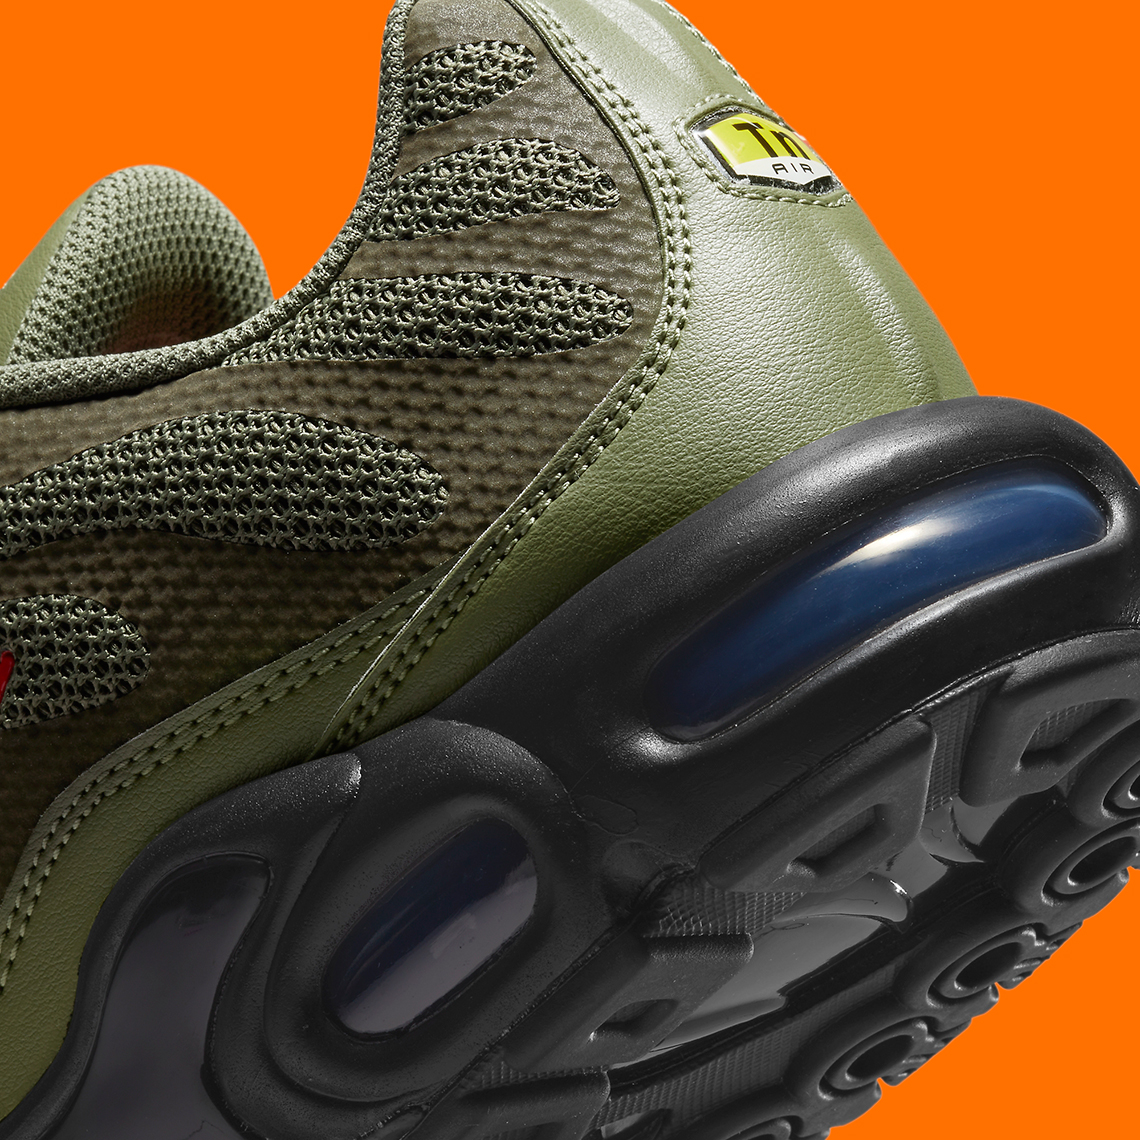 Nike Air Max Plus Olive Reflective Dn7997 200 8